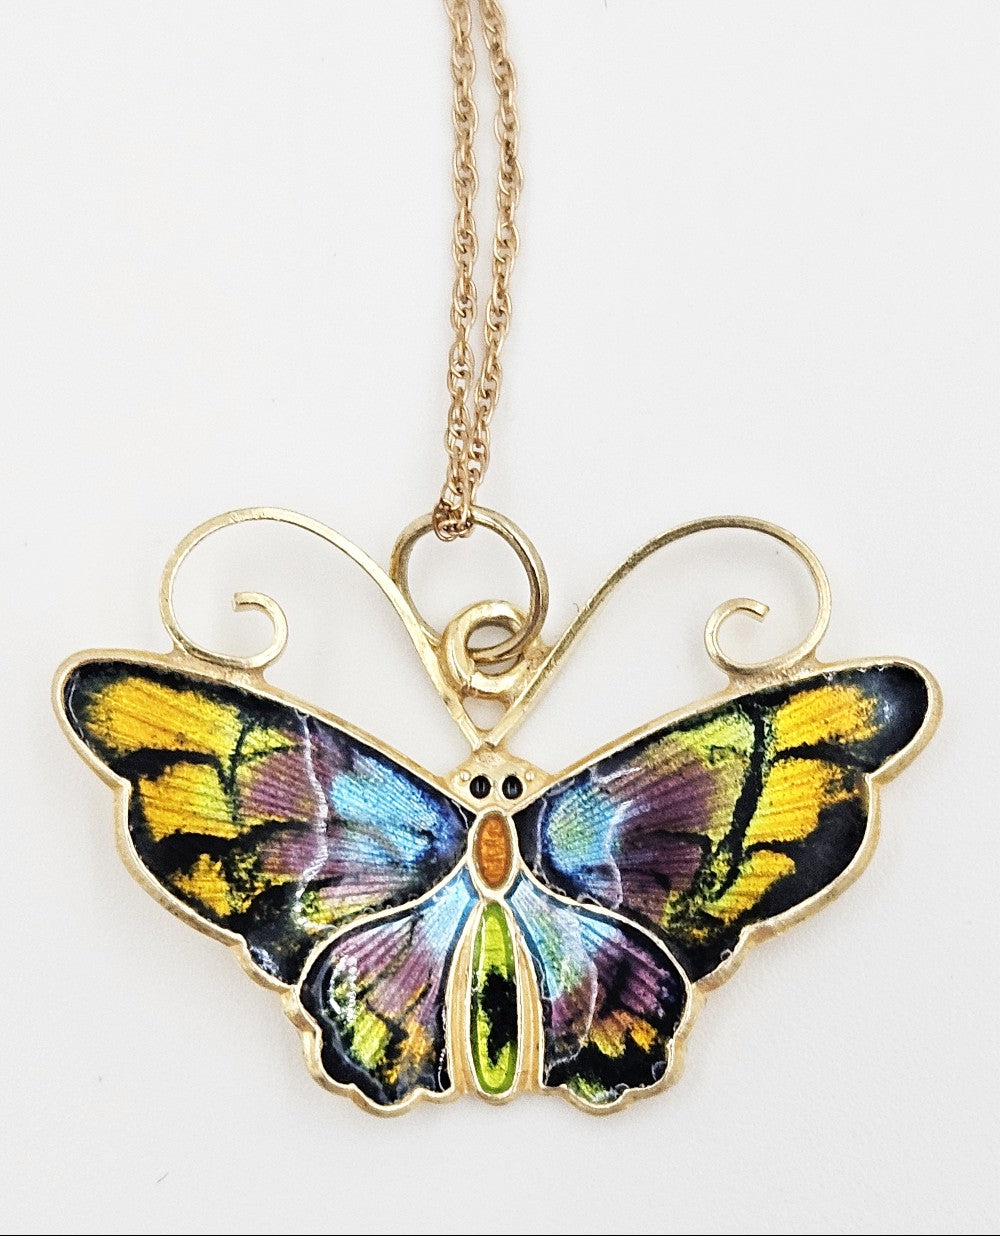 Superb David Andersen Norway Gilt Sterling Butterfly Necklace Circa 1940s